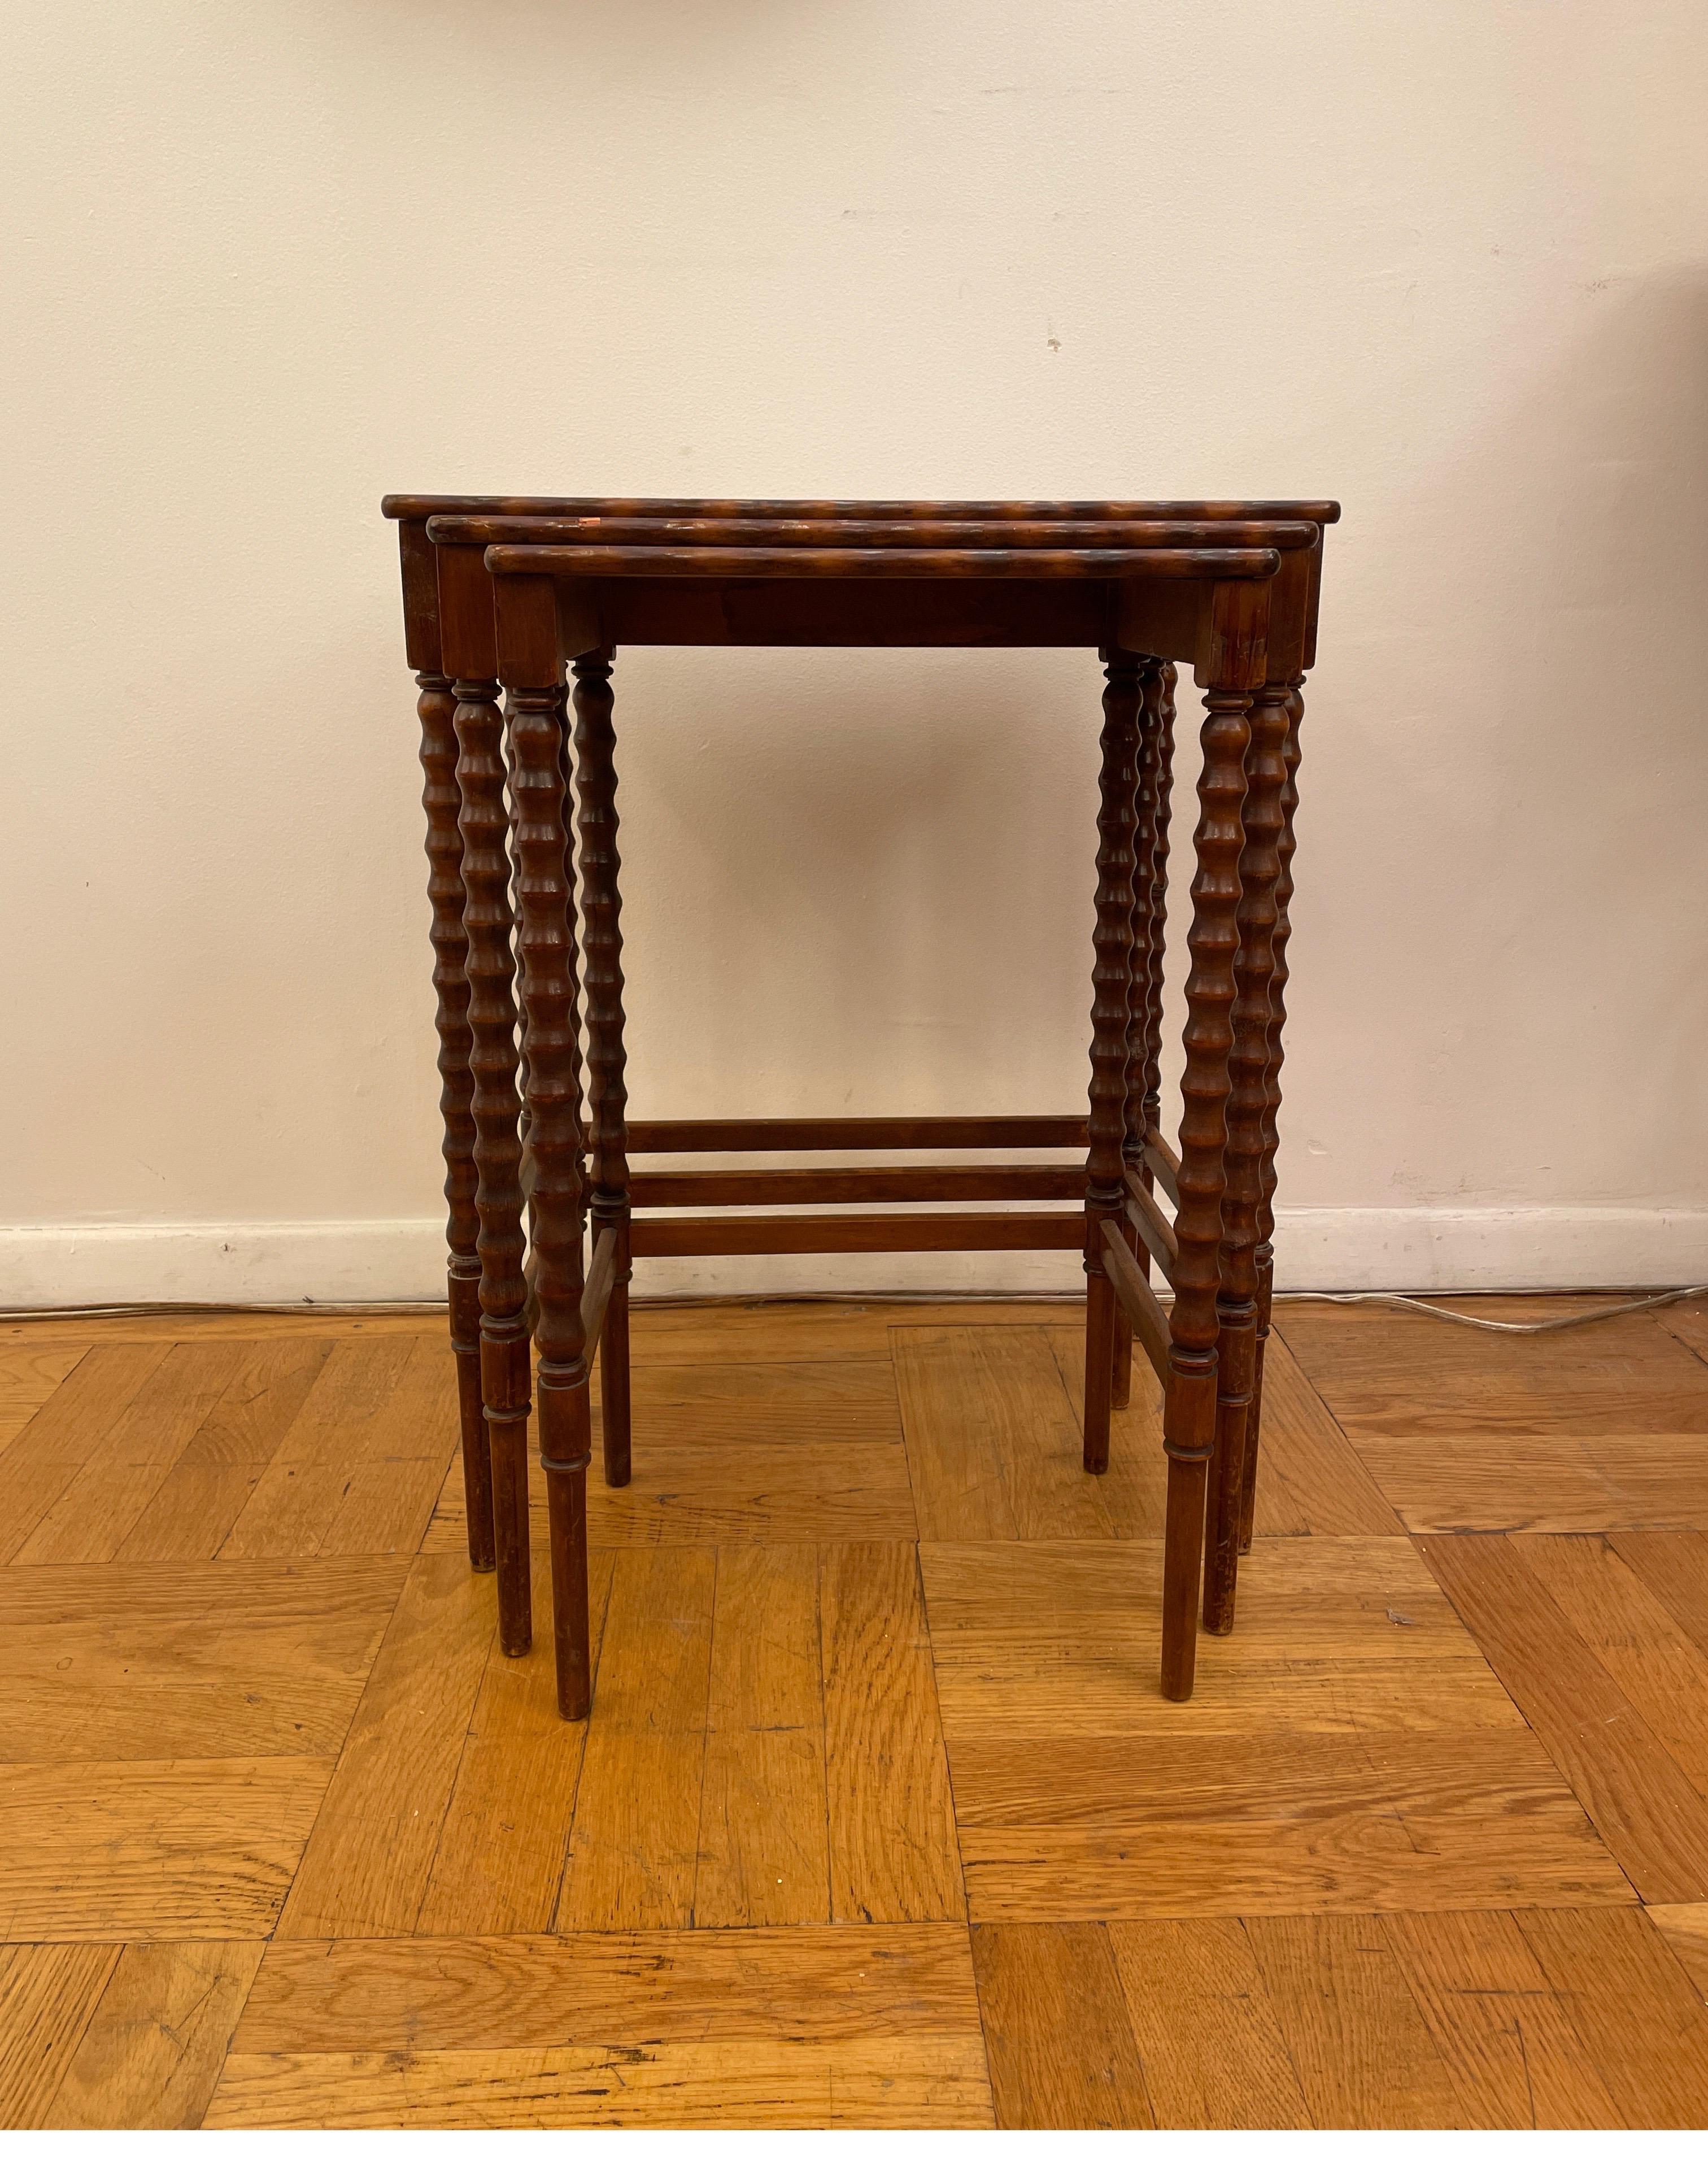 Lovely set of nesting antique tables with highly sought after barley twist legs and bevelled edge tops borrows classical forms with modern taste and convenance. Still practical and lovely today, these tables stand as a homage to generations of